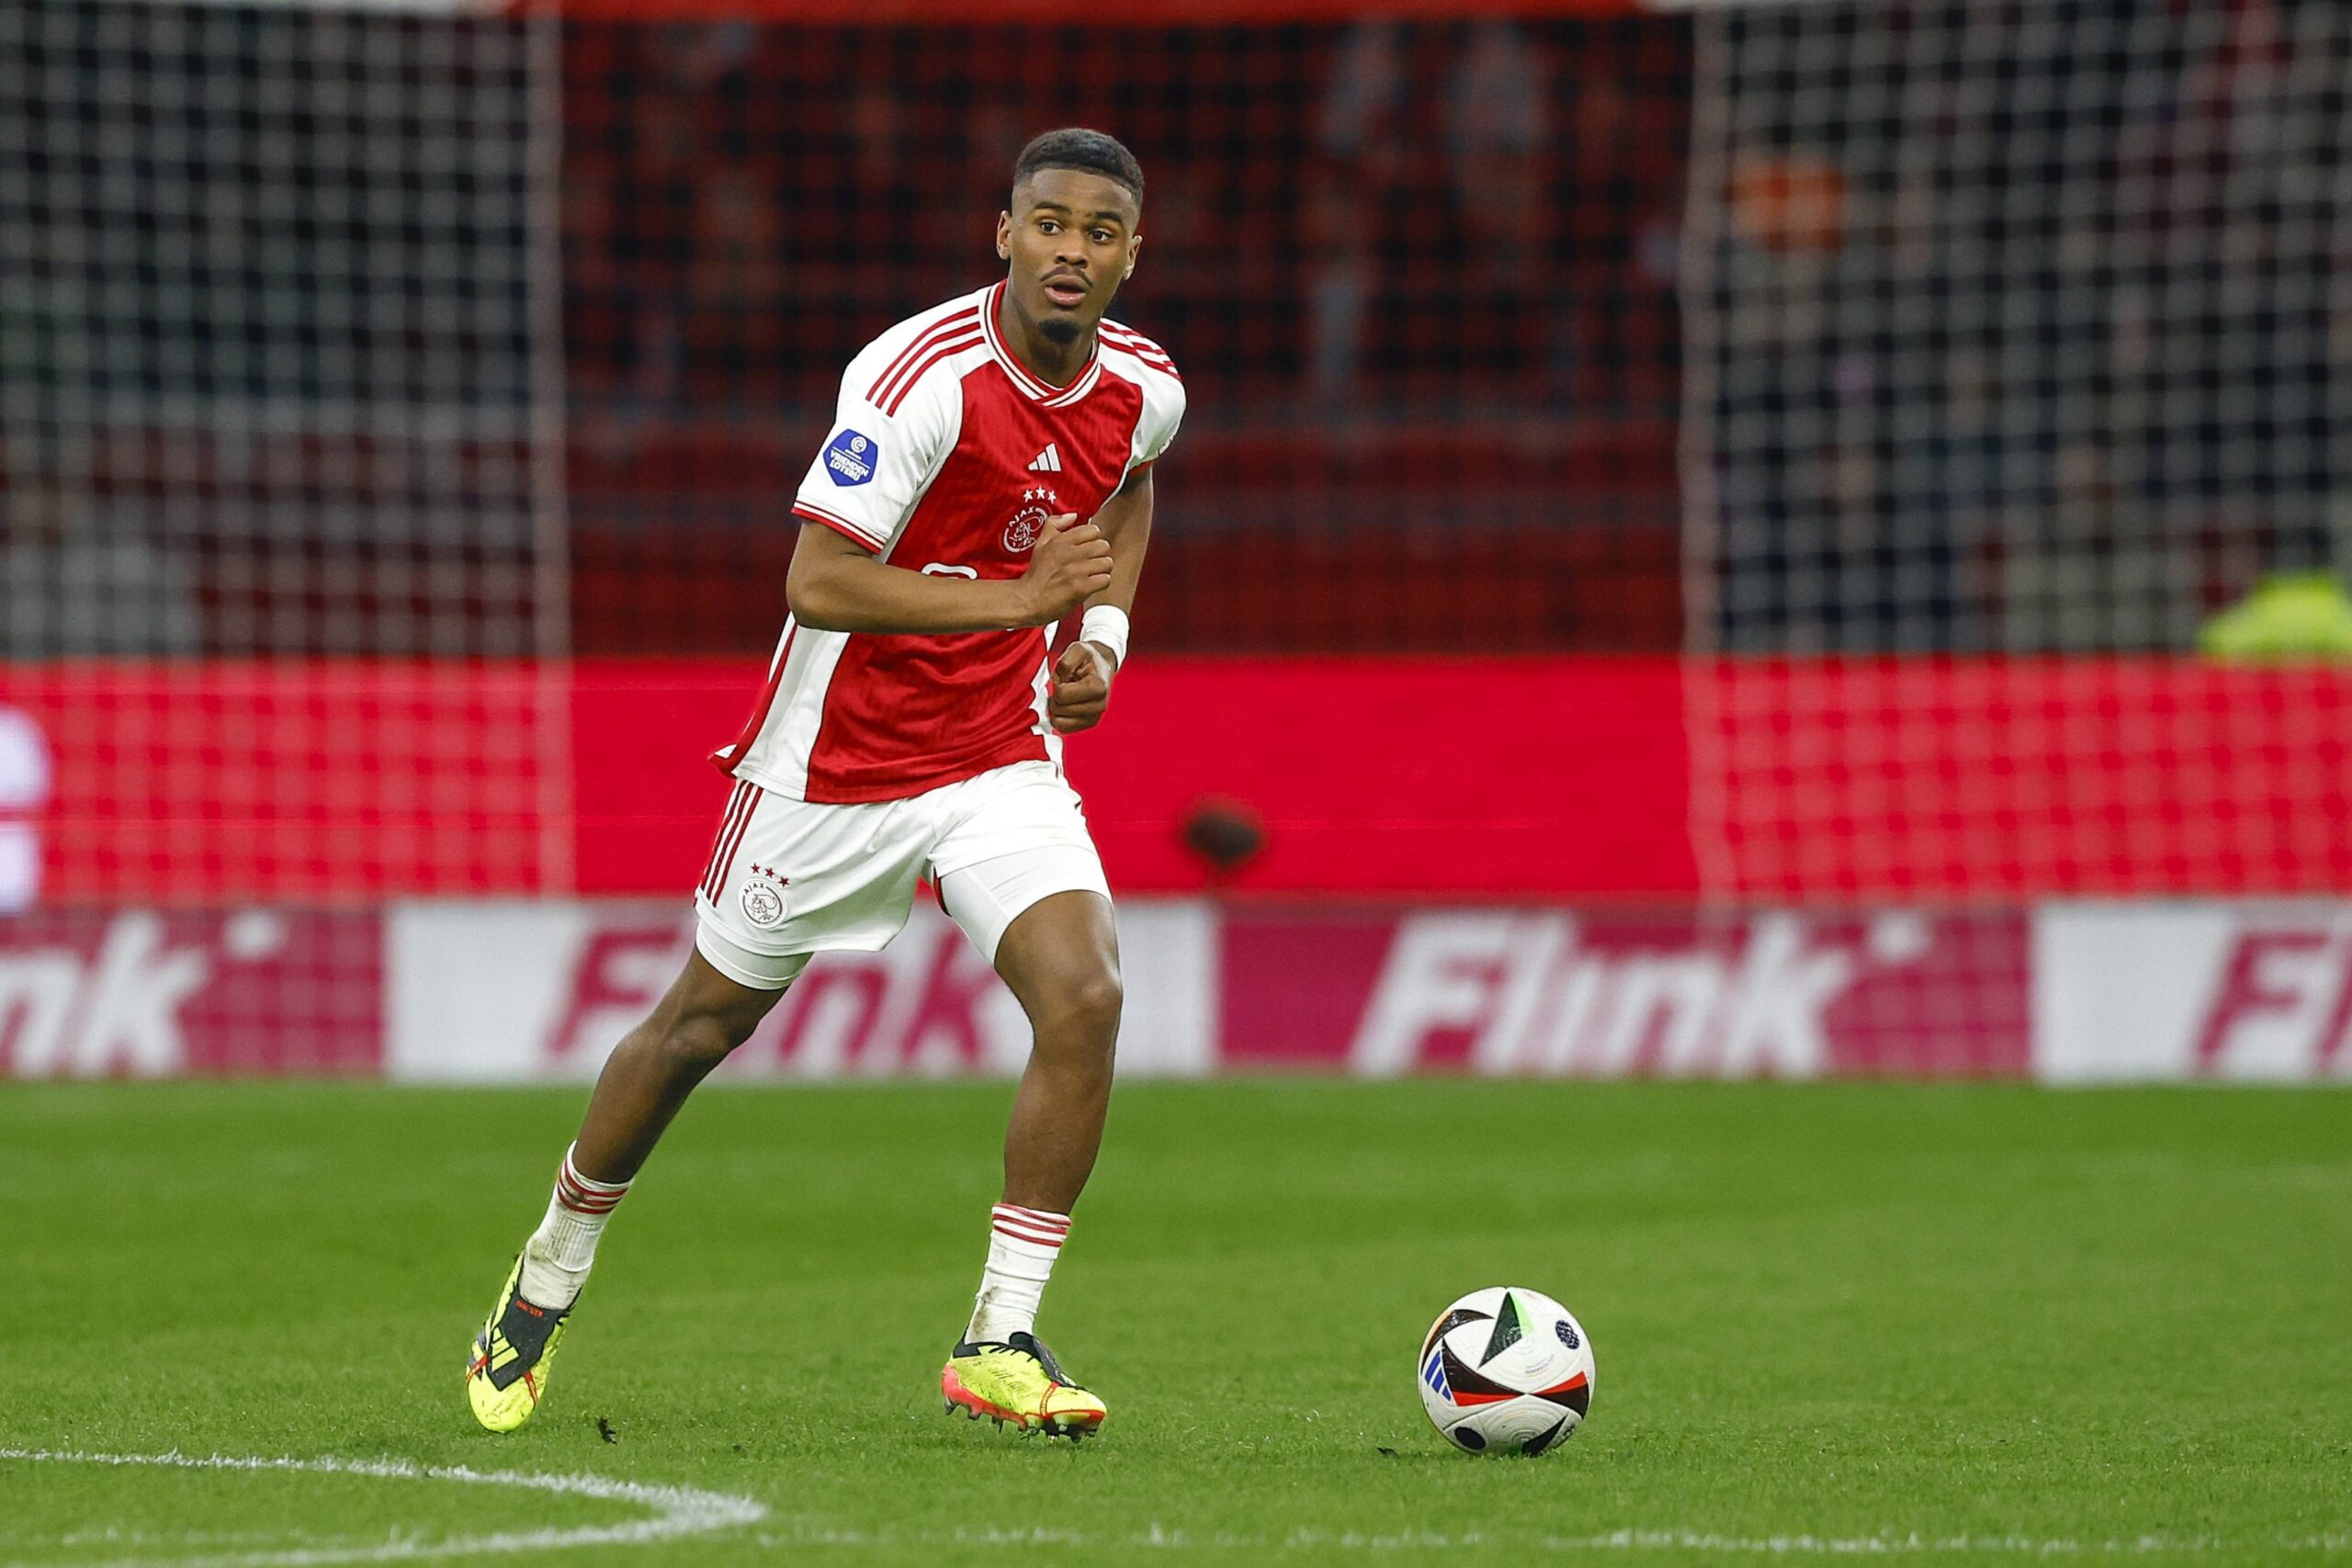 Arsenal Eye Transfer Swoop for Star Ajax Duo as They Aim to Bolster Their Squad Depth